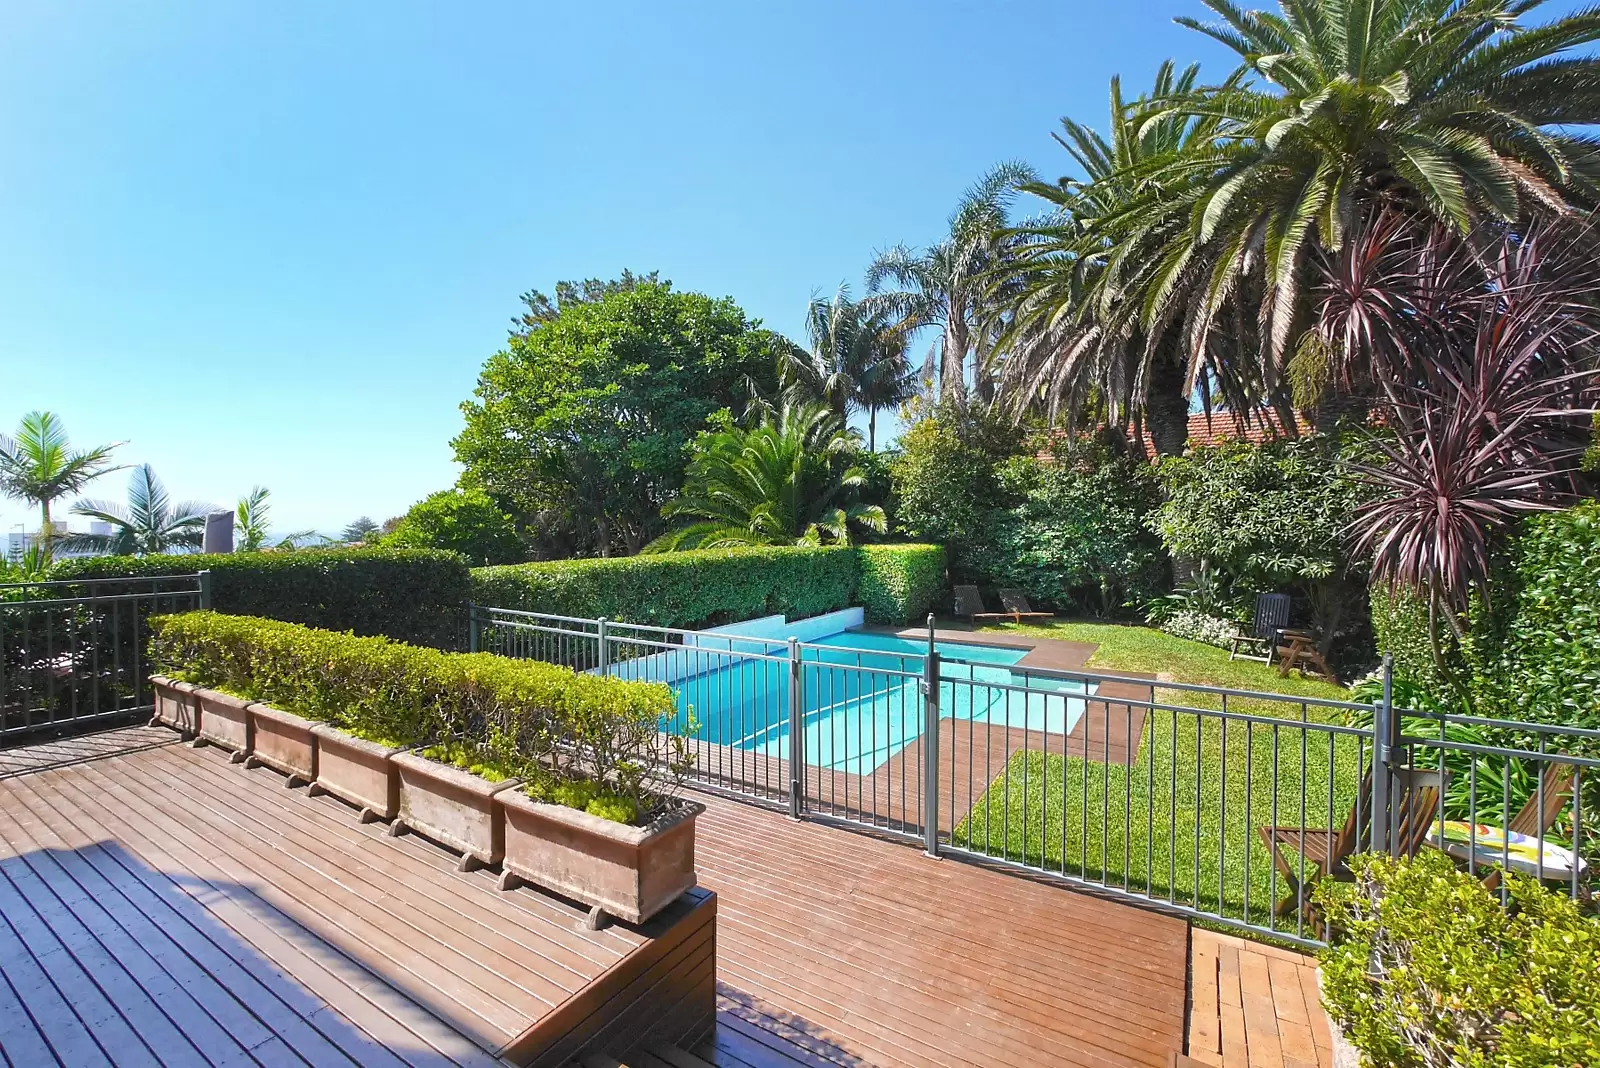 Photo #3: 9 Clarendon Street, Vaucluse - Sold by Sydney Sotheby's International Realty